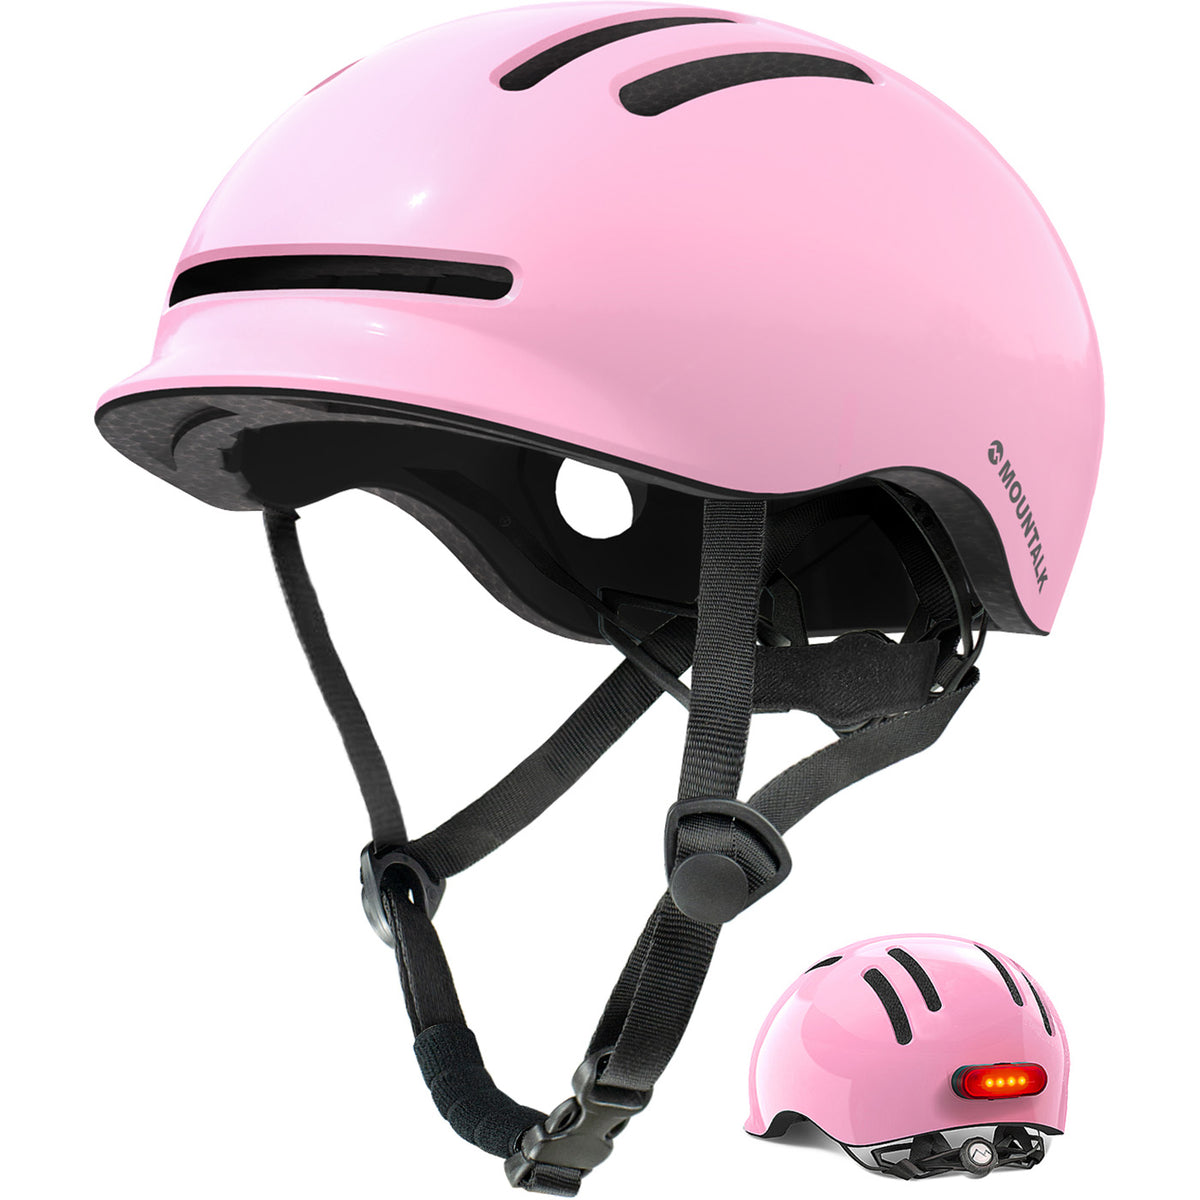 Bike Helmets for Adults with Magnetic Light, Shiny Pink